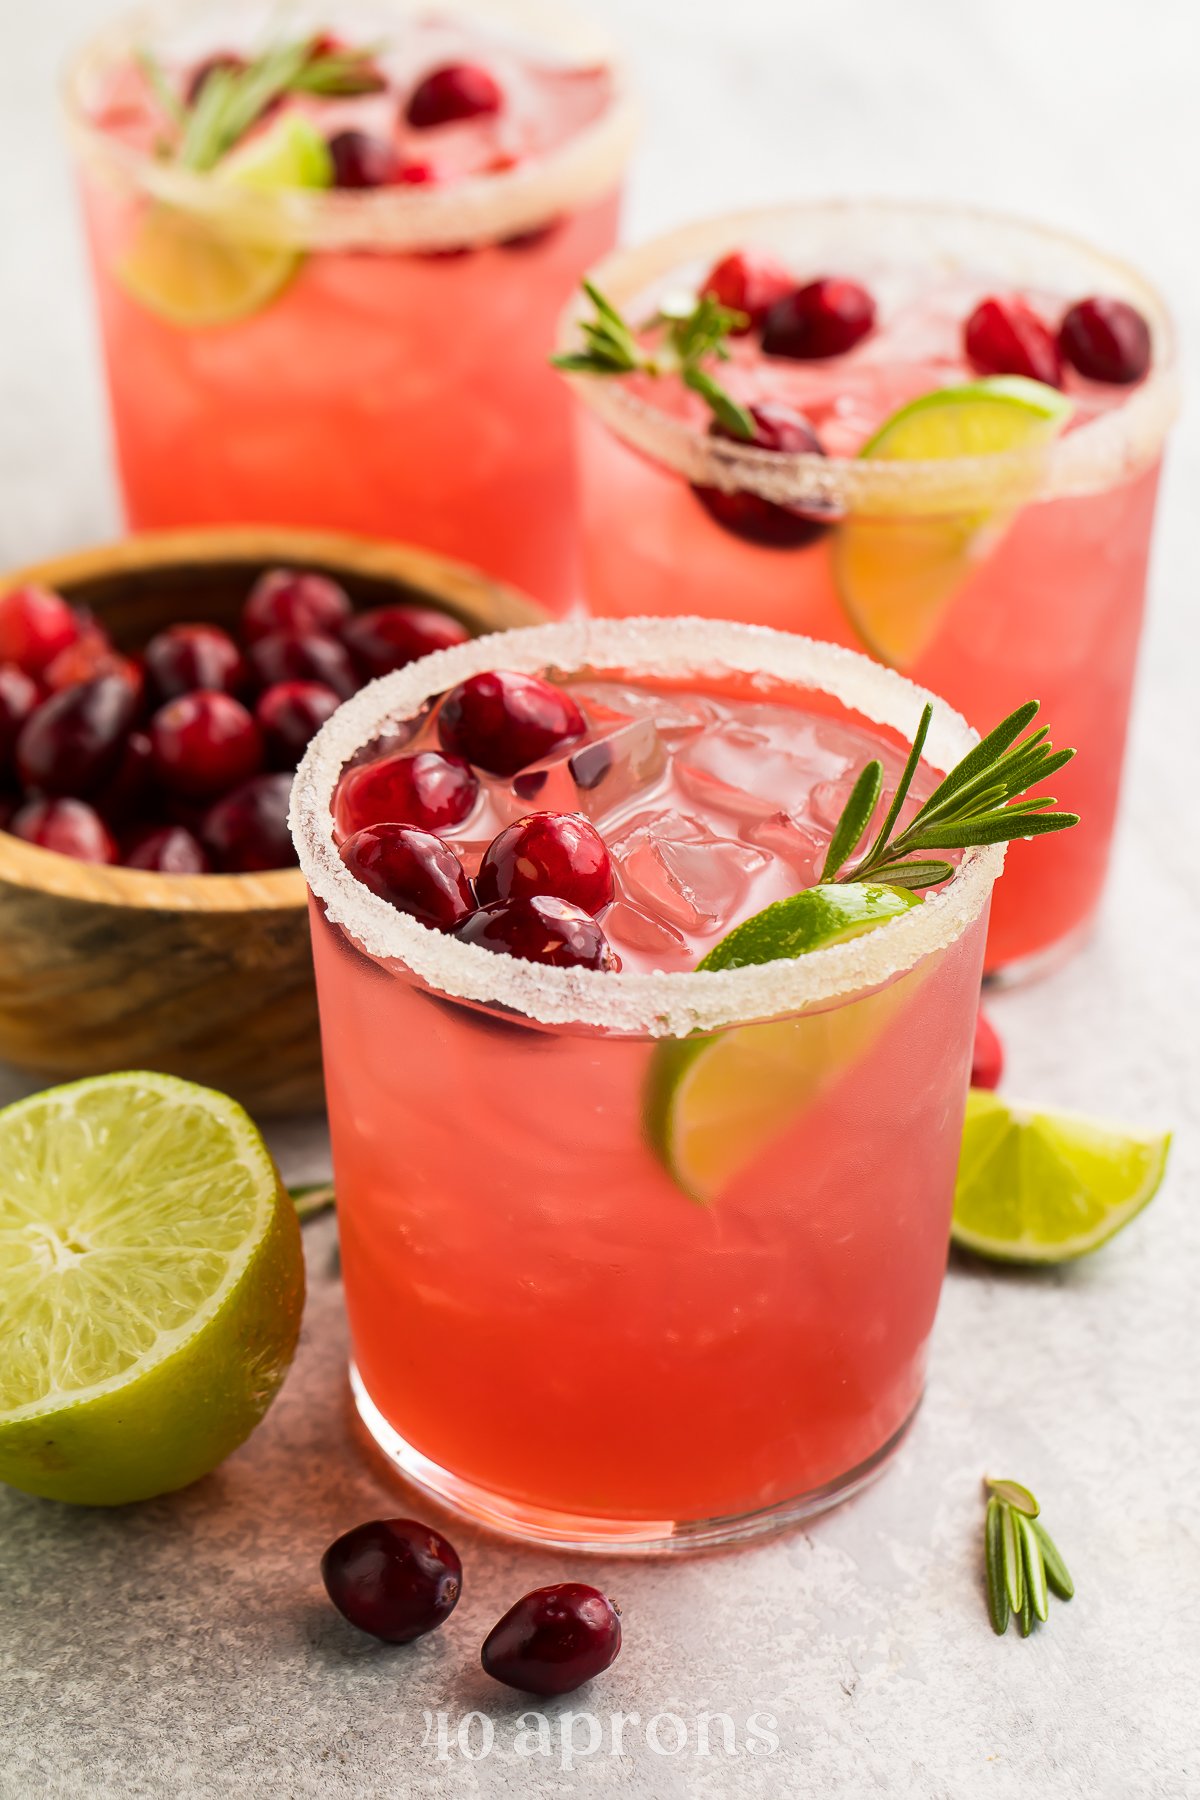 Bright red cranberry margaritas shown in stemless glasses rimmed with salt. Drinks are garnished with cranberries, rosemary, and lime wedges.